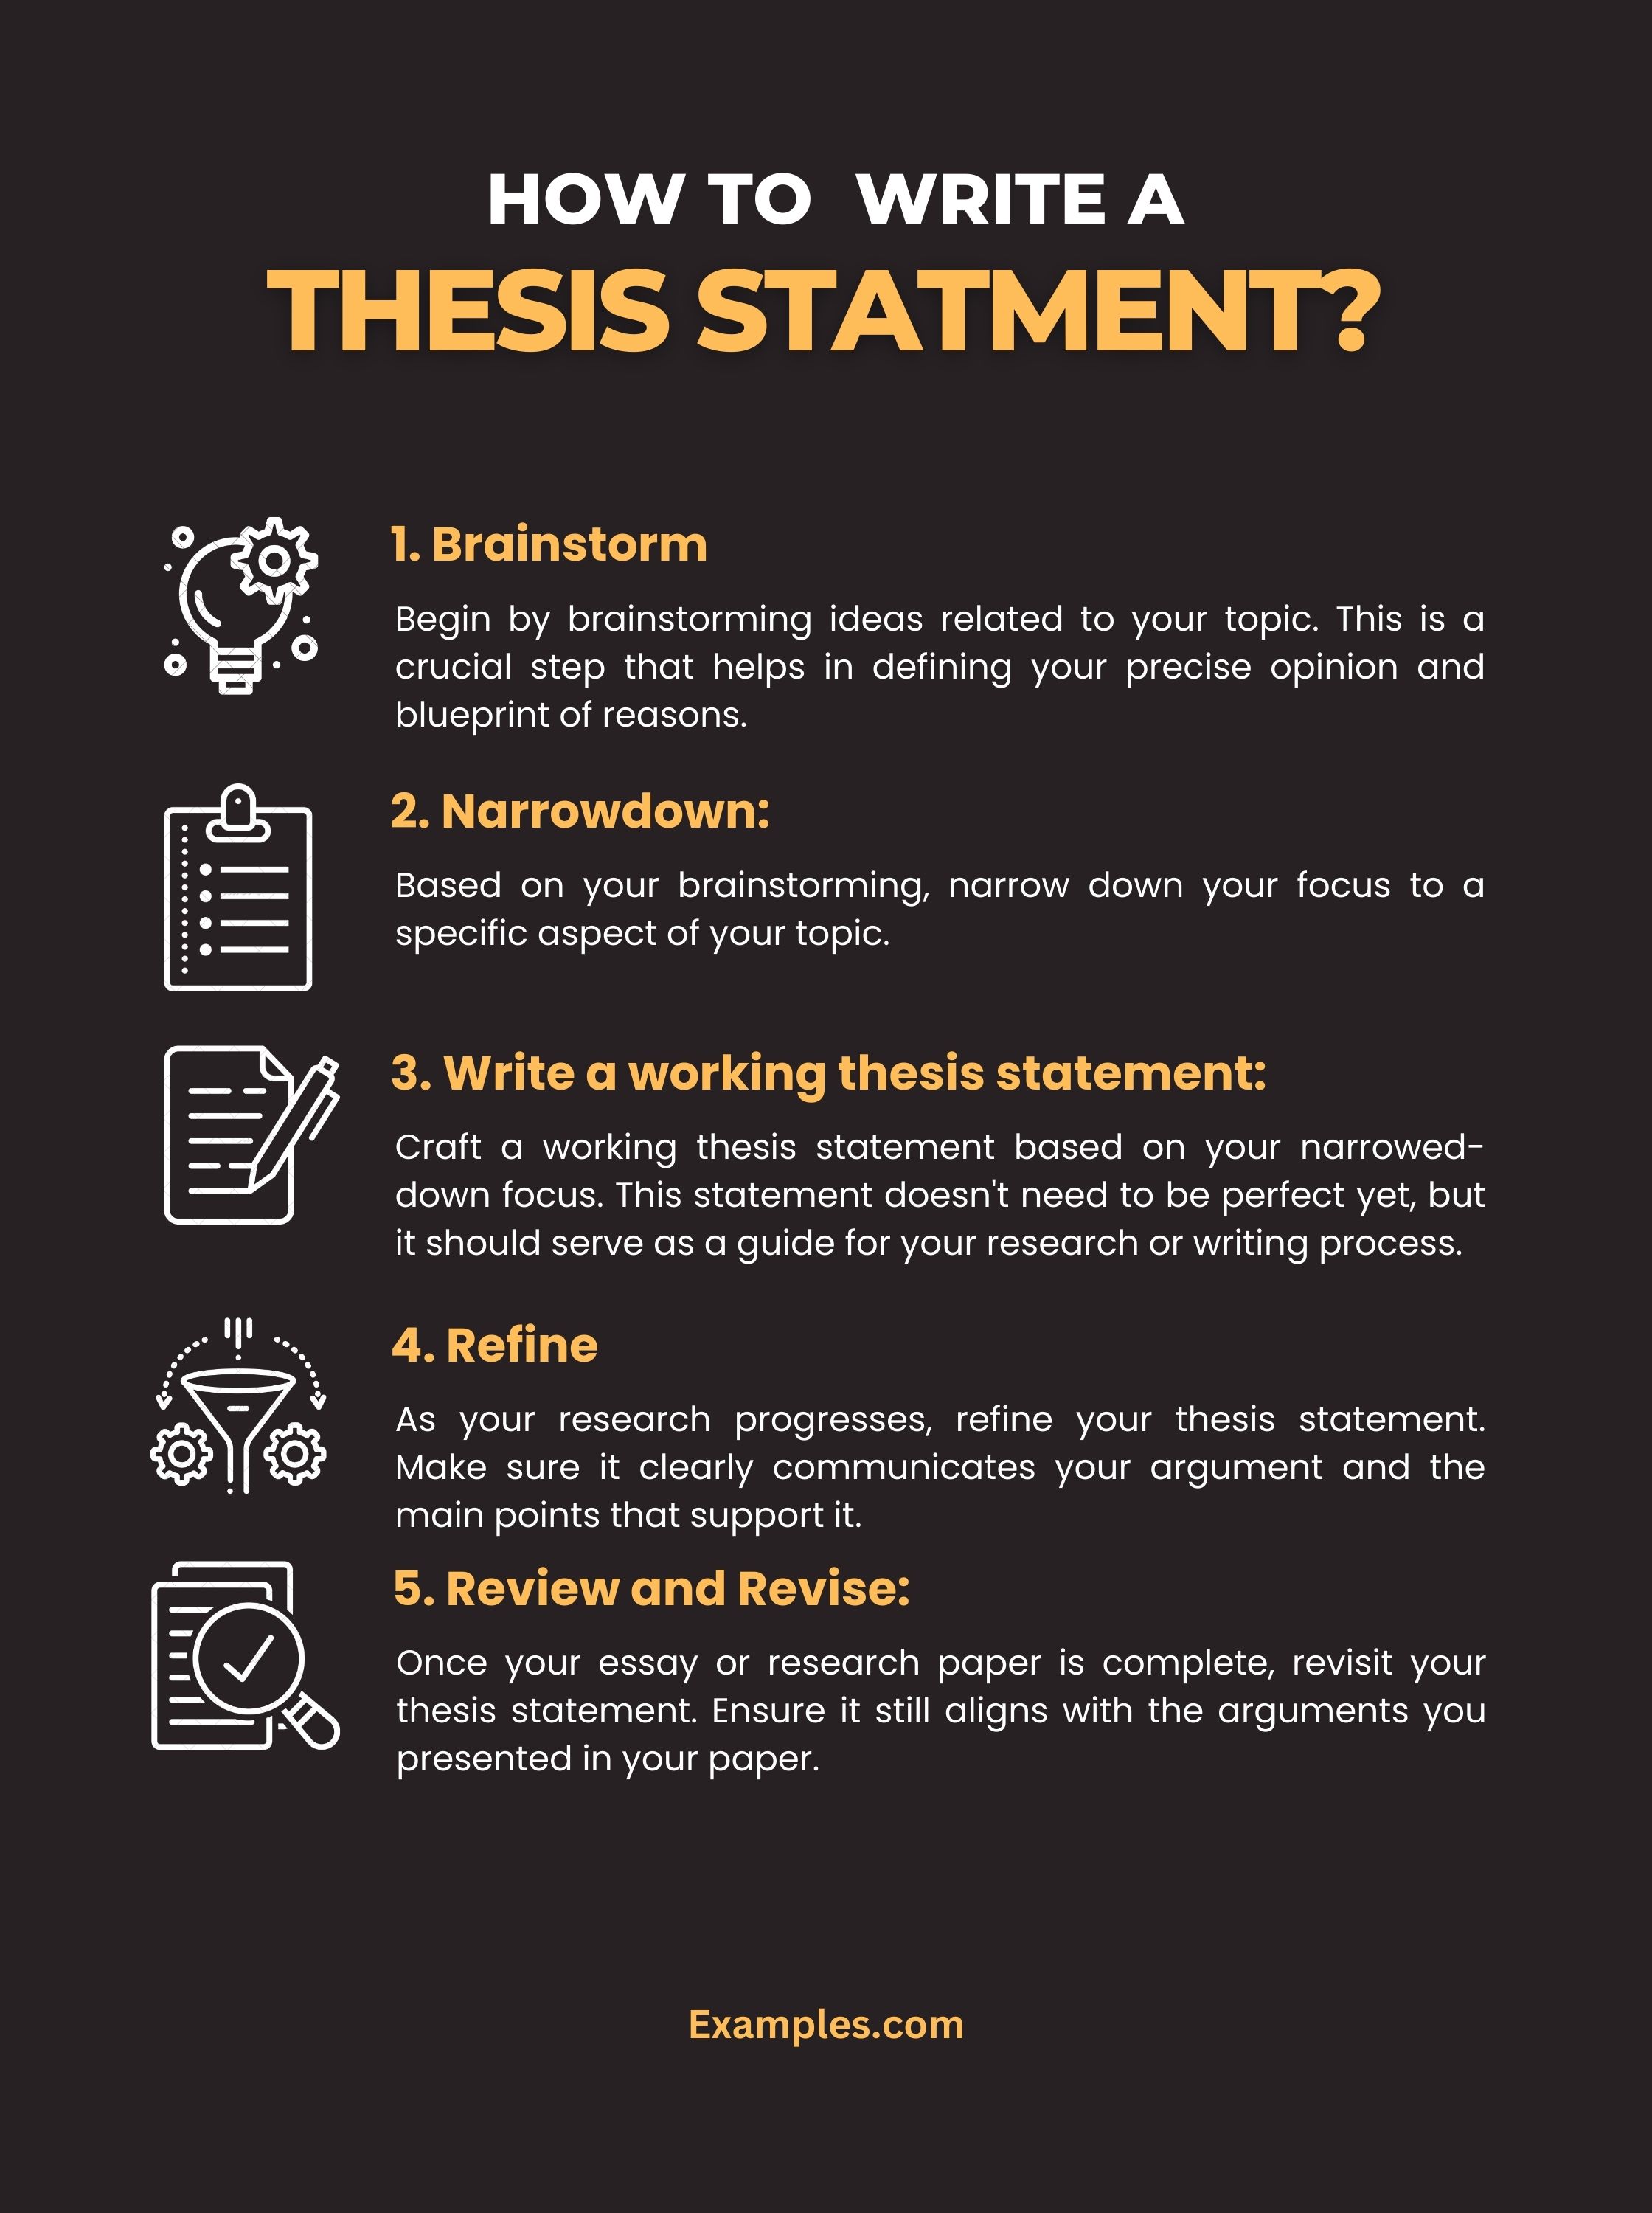 declaration for thesis example